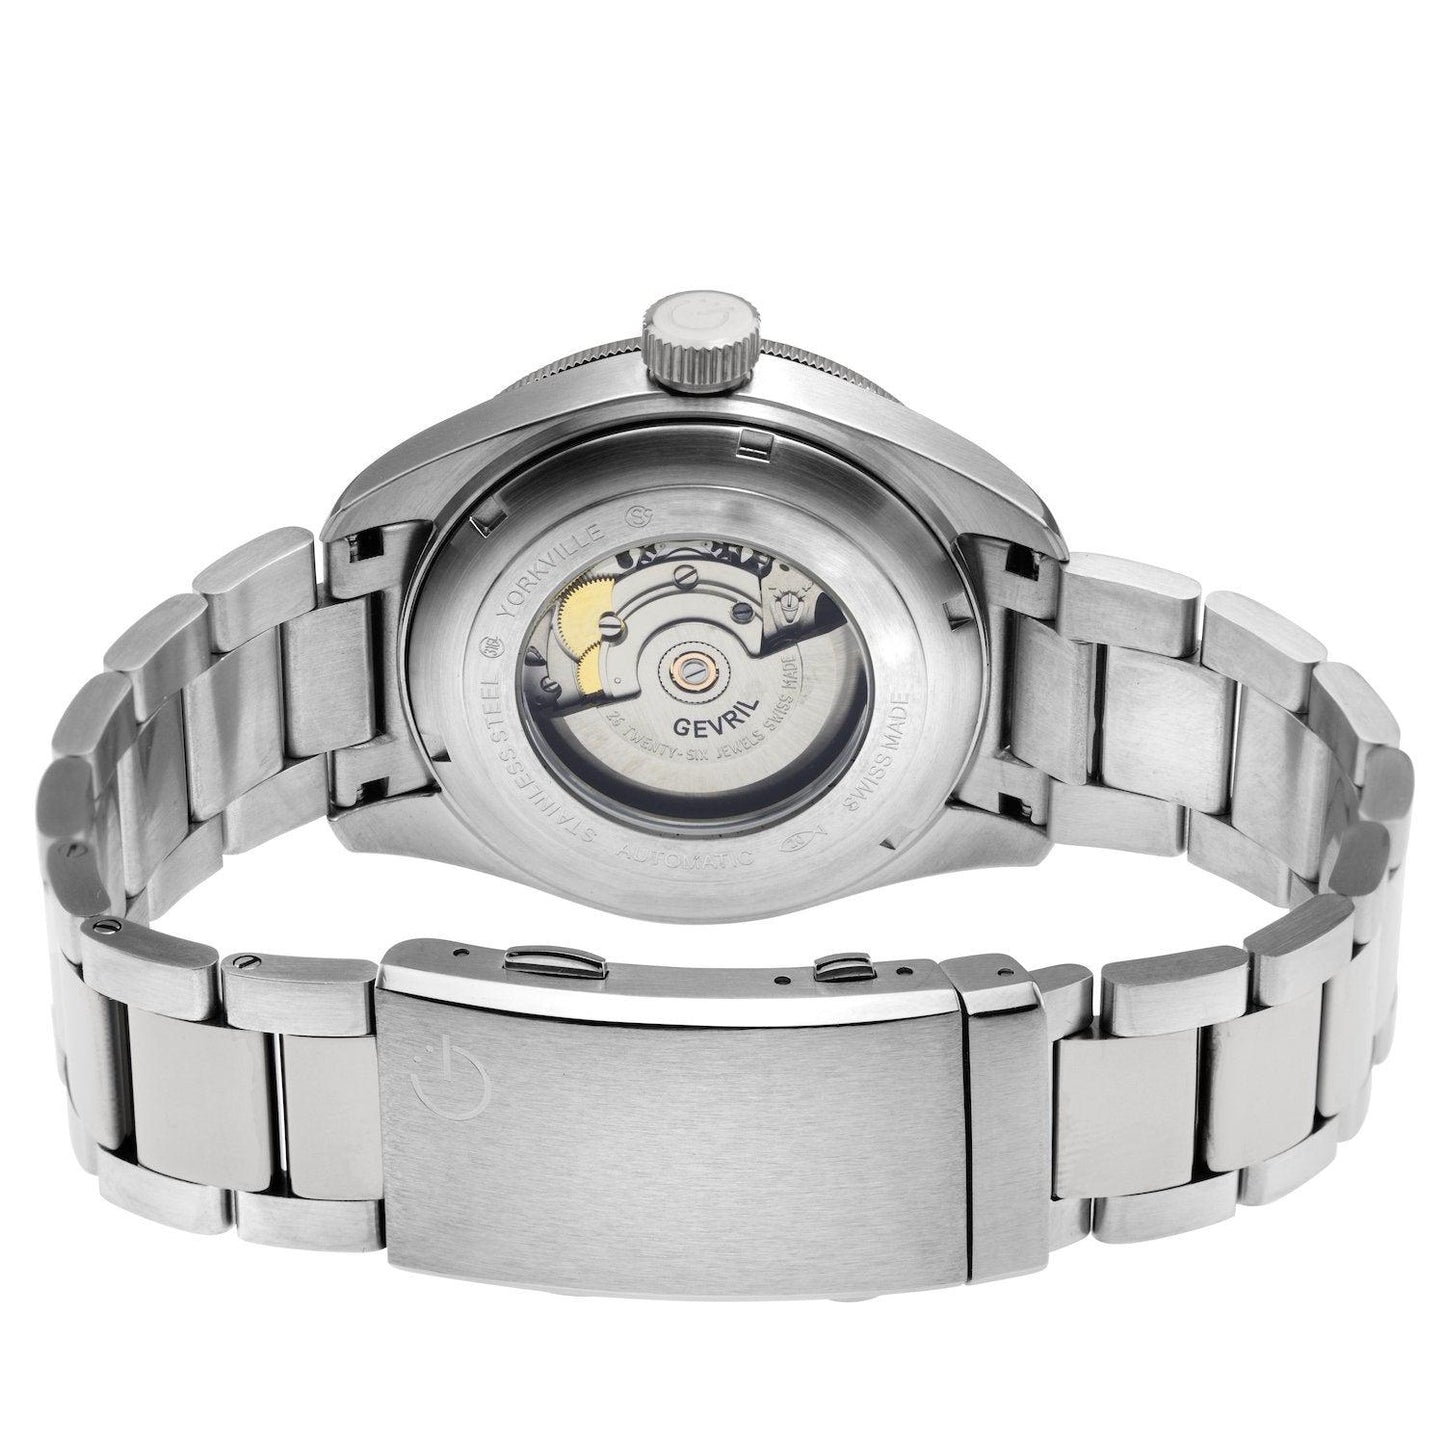 Gevril-Luxury-Swiss-Watches-Gevril Yorkville Automatic-48600